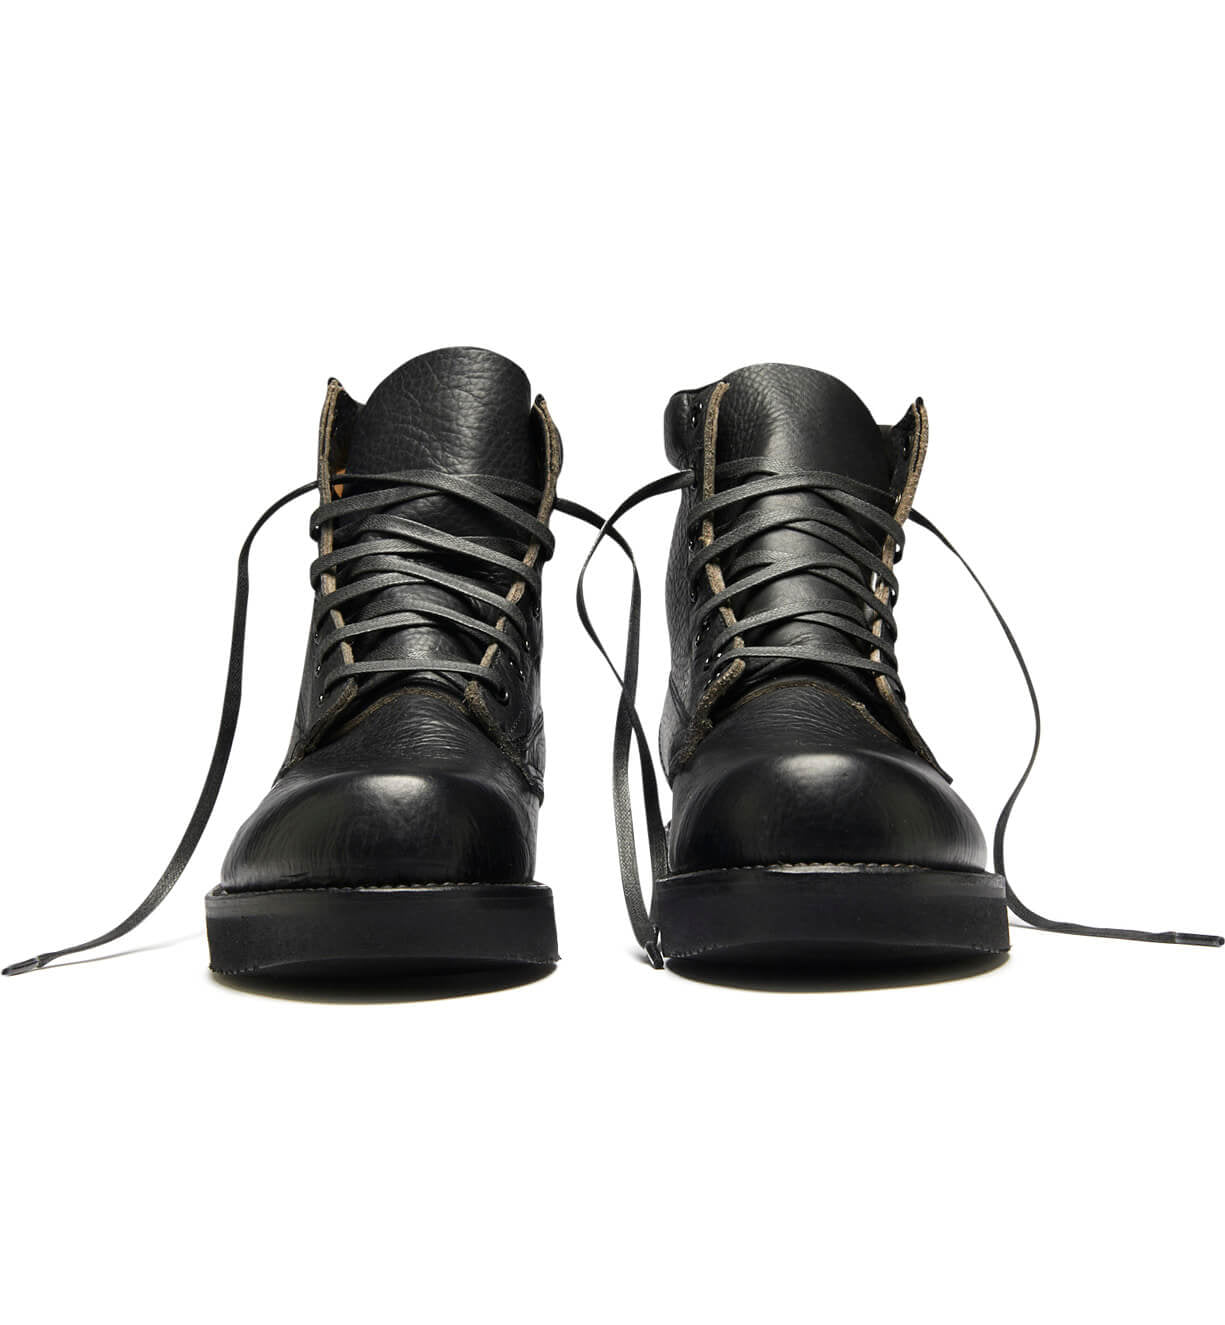 A pair of James Boots from the Broken Homme collection on a white background.